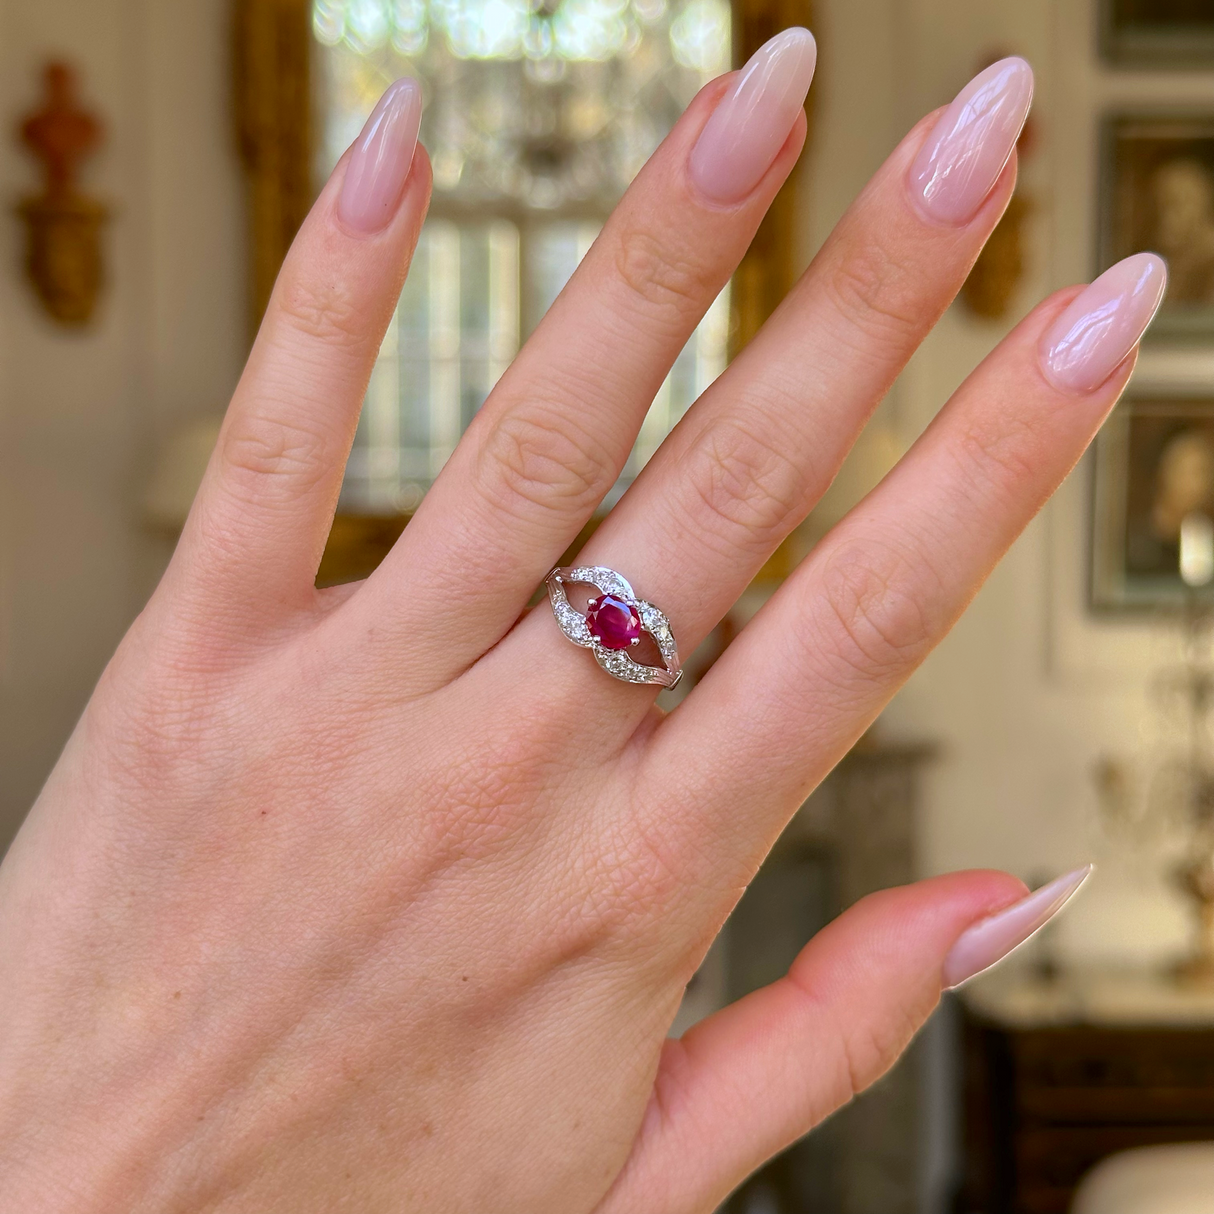 Vintage art deco ruby and diamond ring worn on hand. 